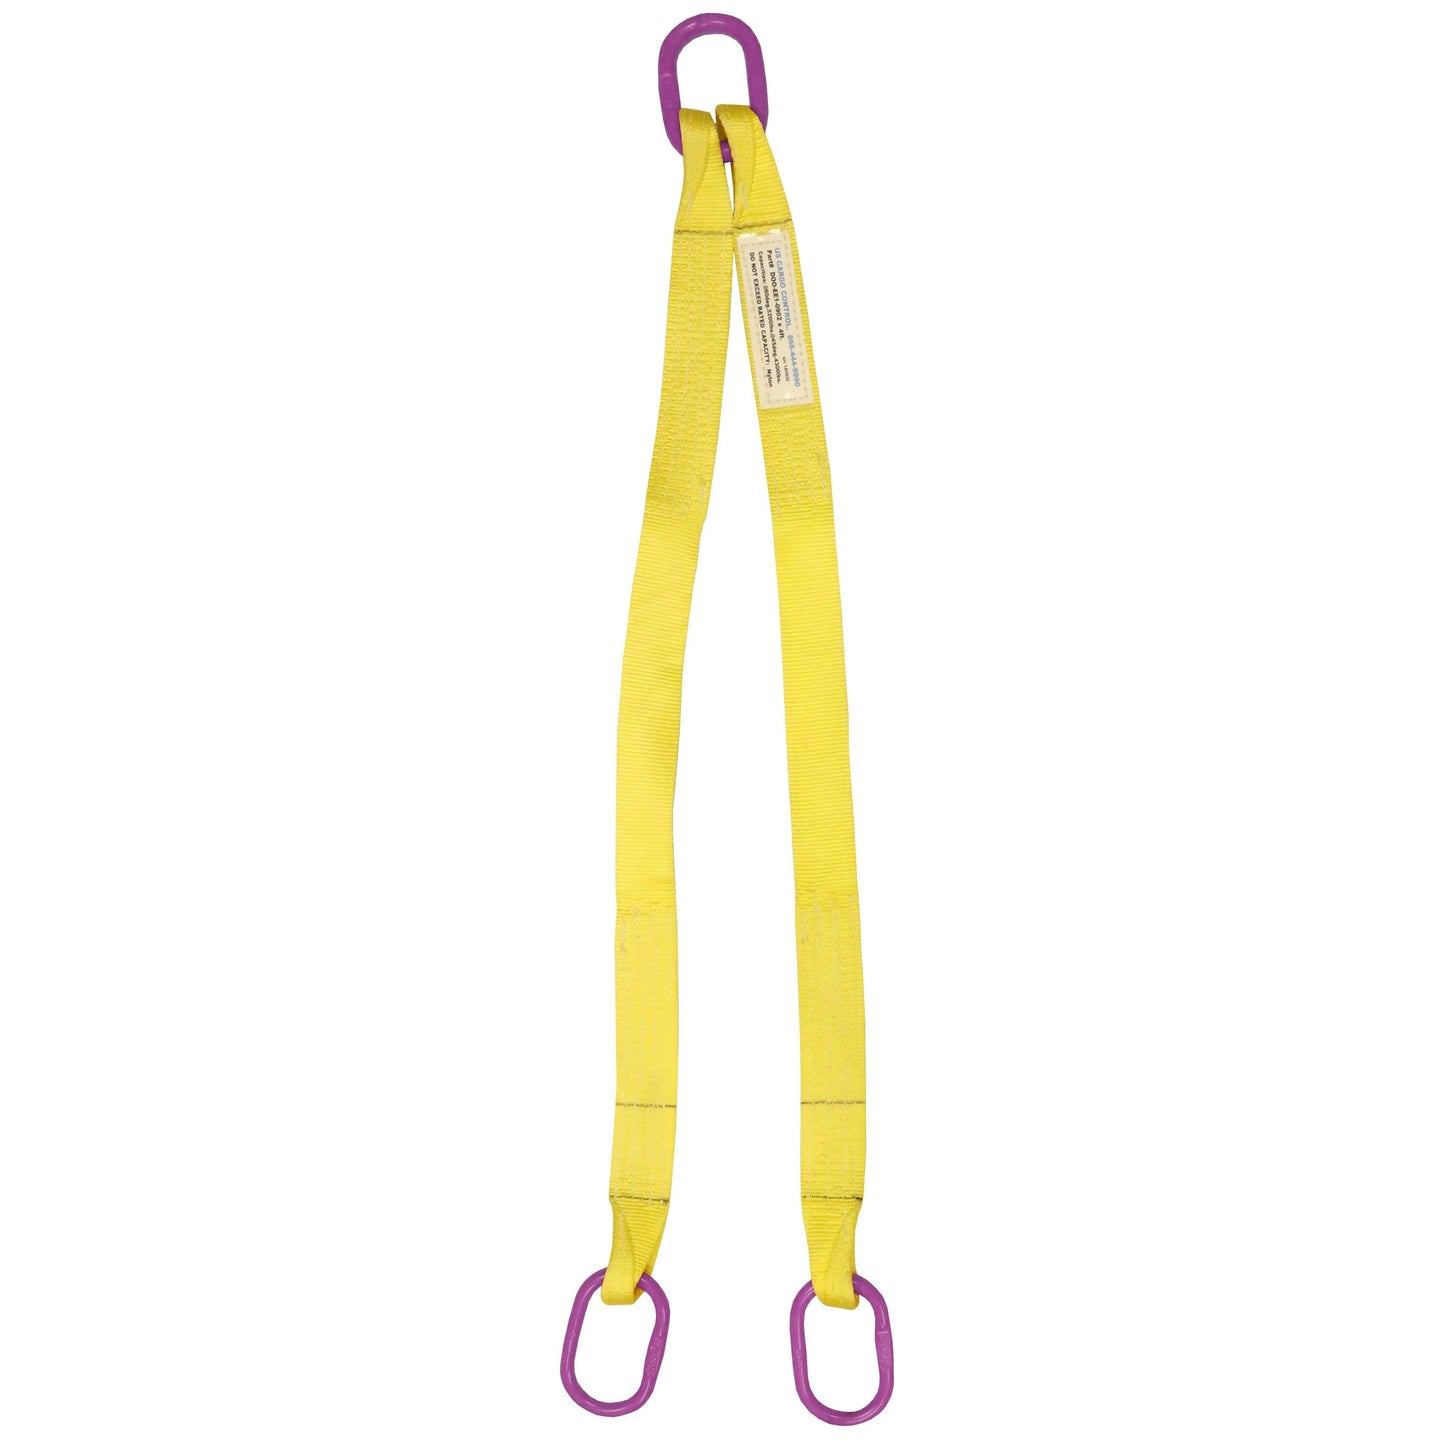 2 inchx3 foot (2 ply) Double Leg Nylon Sling w Master Link Both Ends image